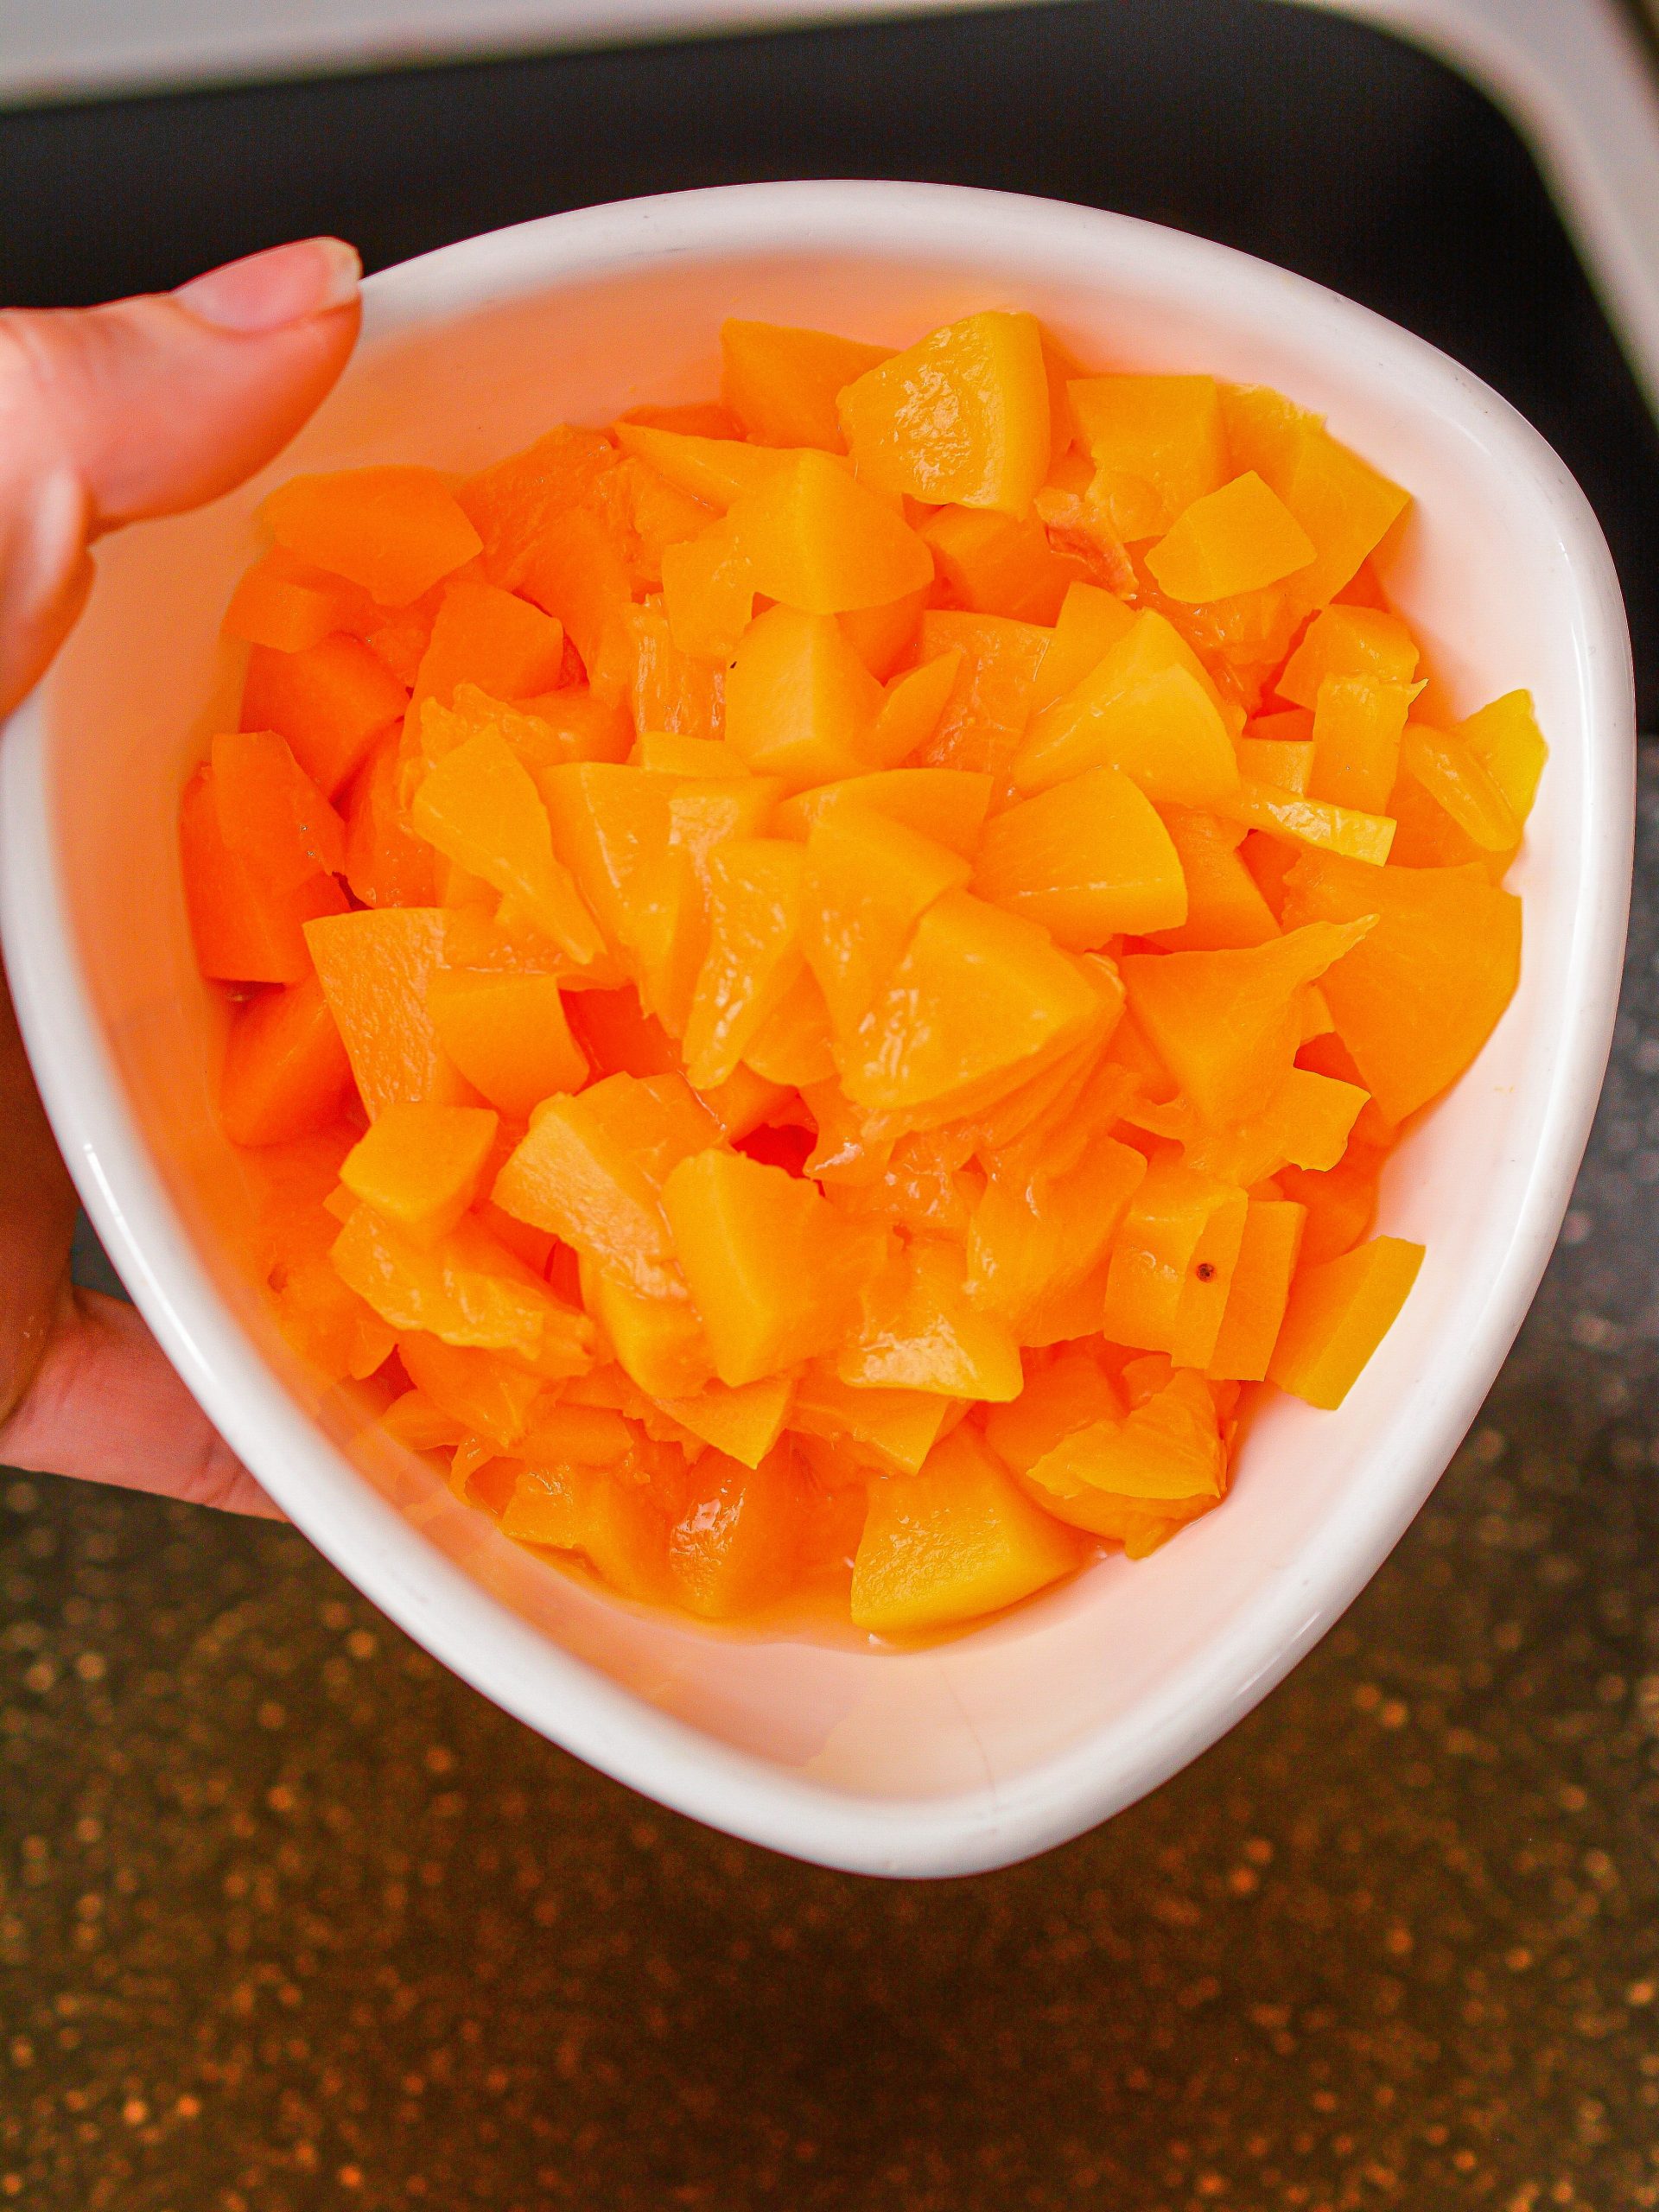 Dice the peaches and add them to a skillet over medium-high heat on the stove.